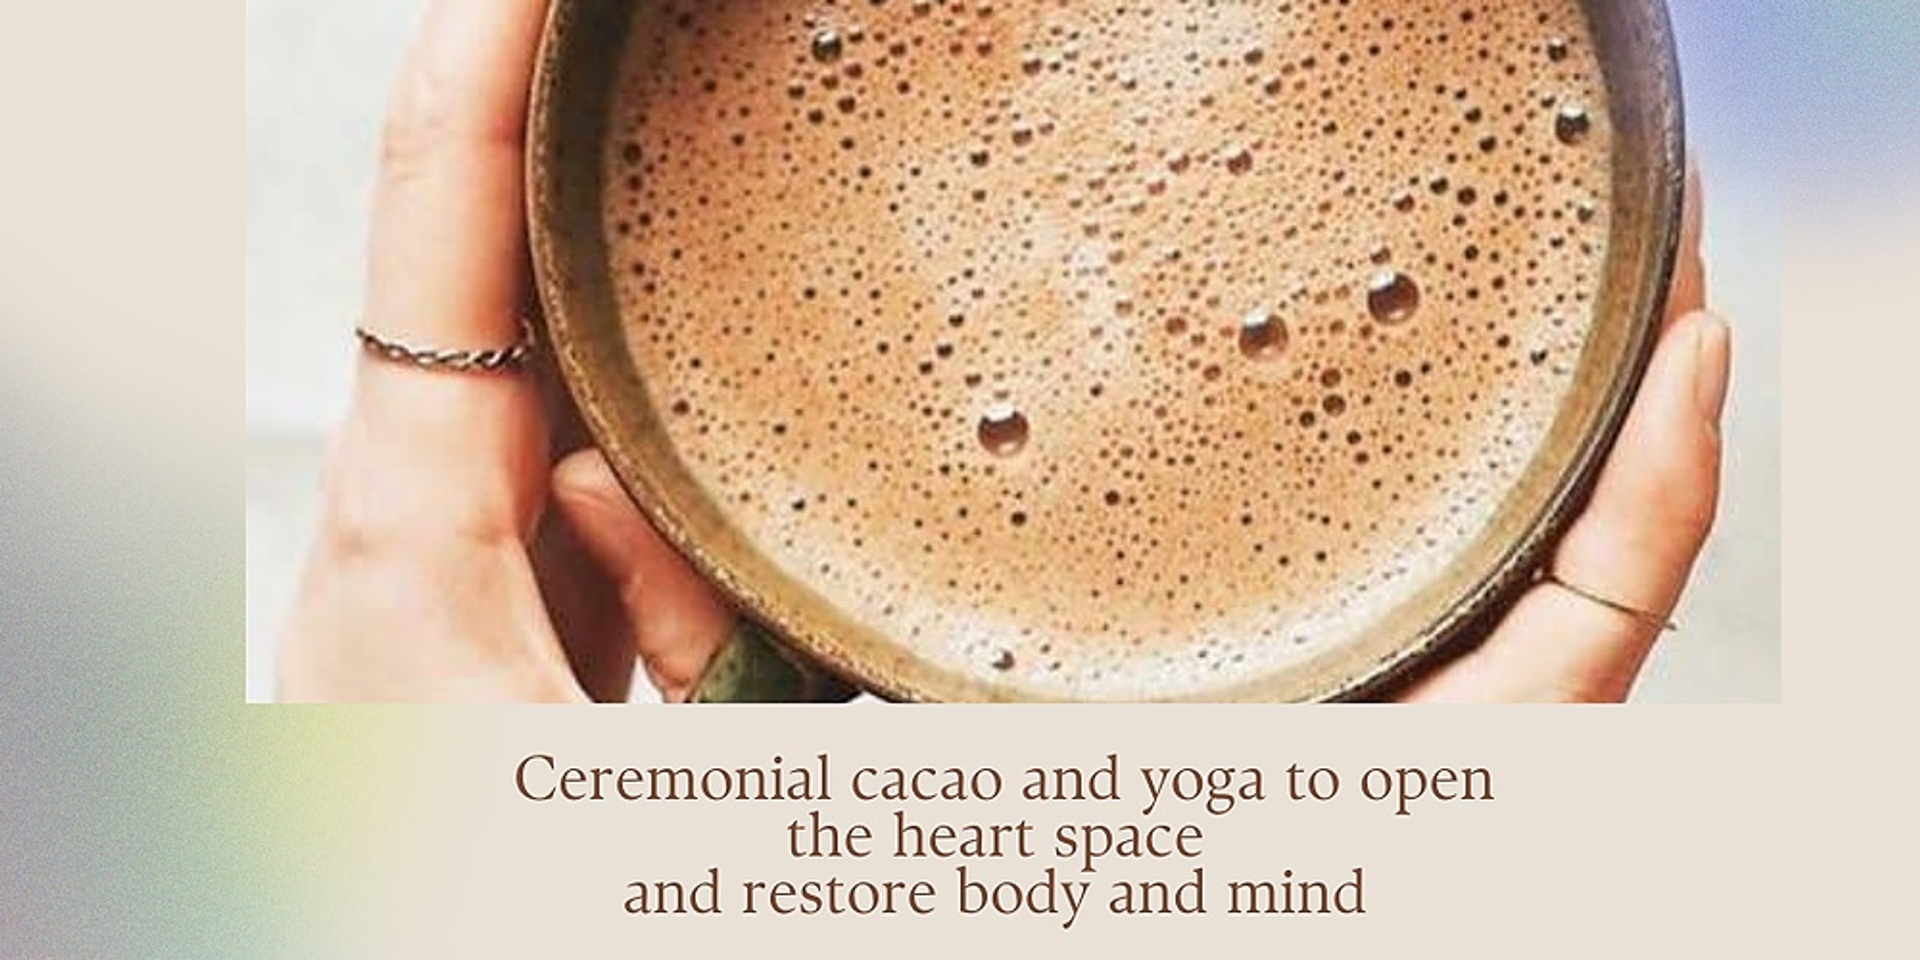 Heart opening yin flow with cacao and yoga nidra 